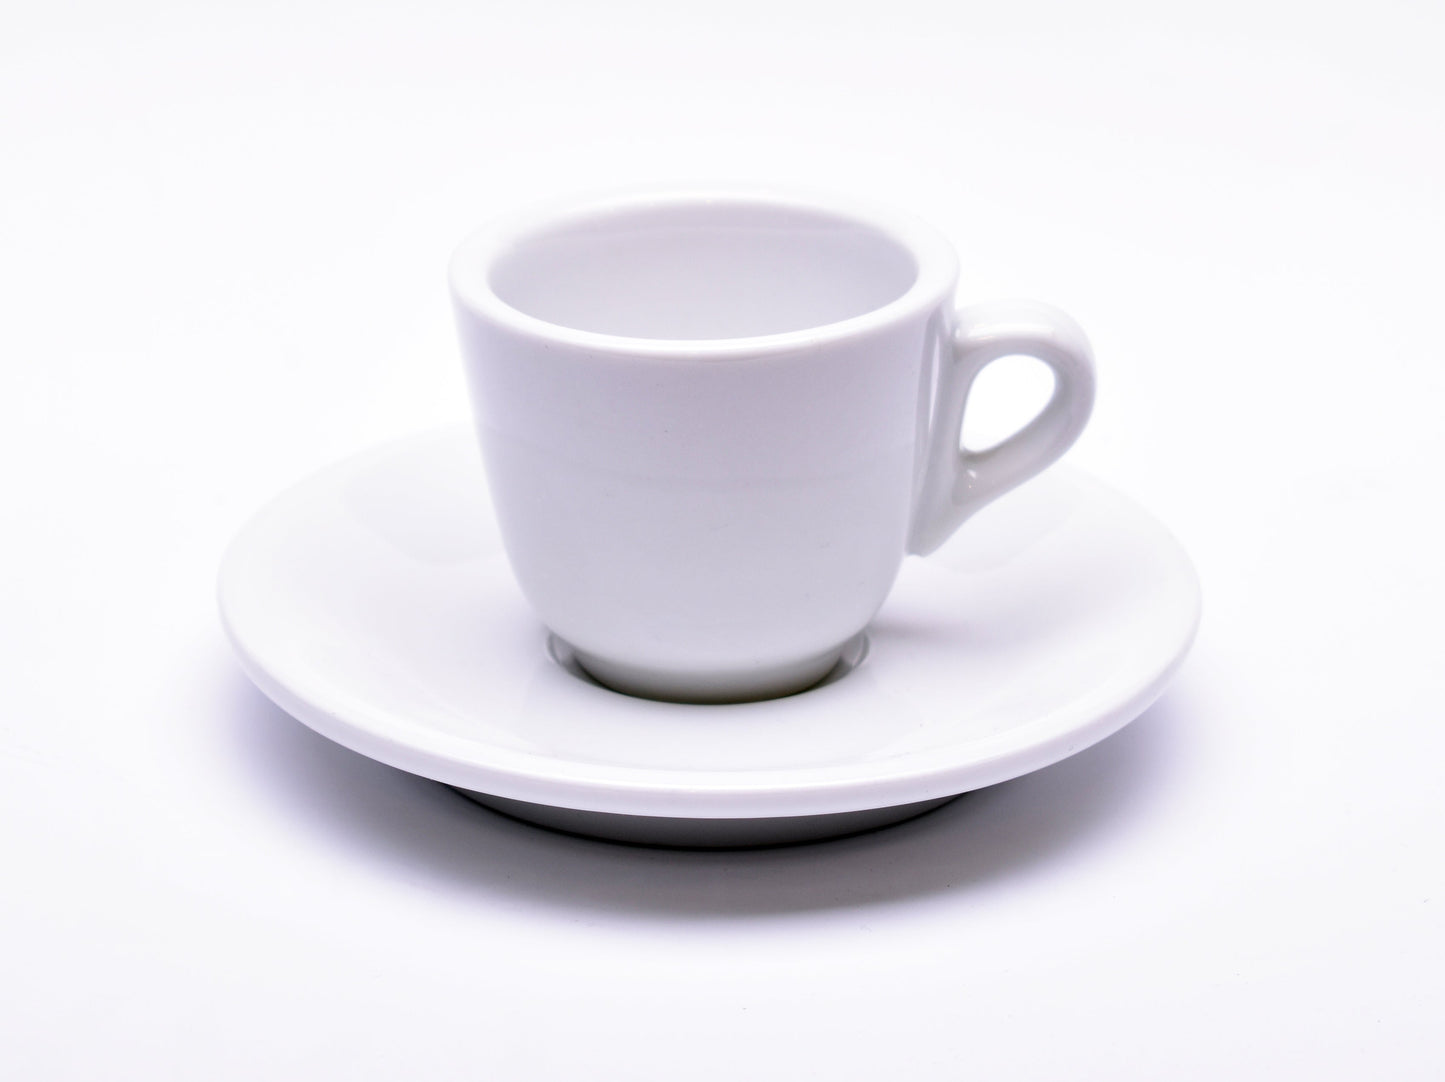 espresso cups and saucers by JoeFrex